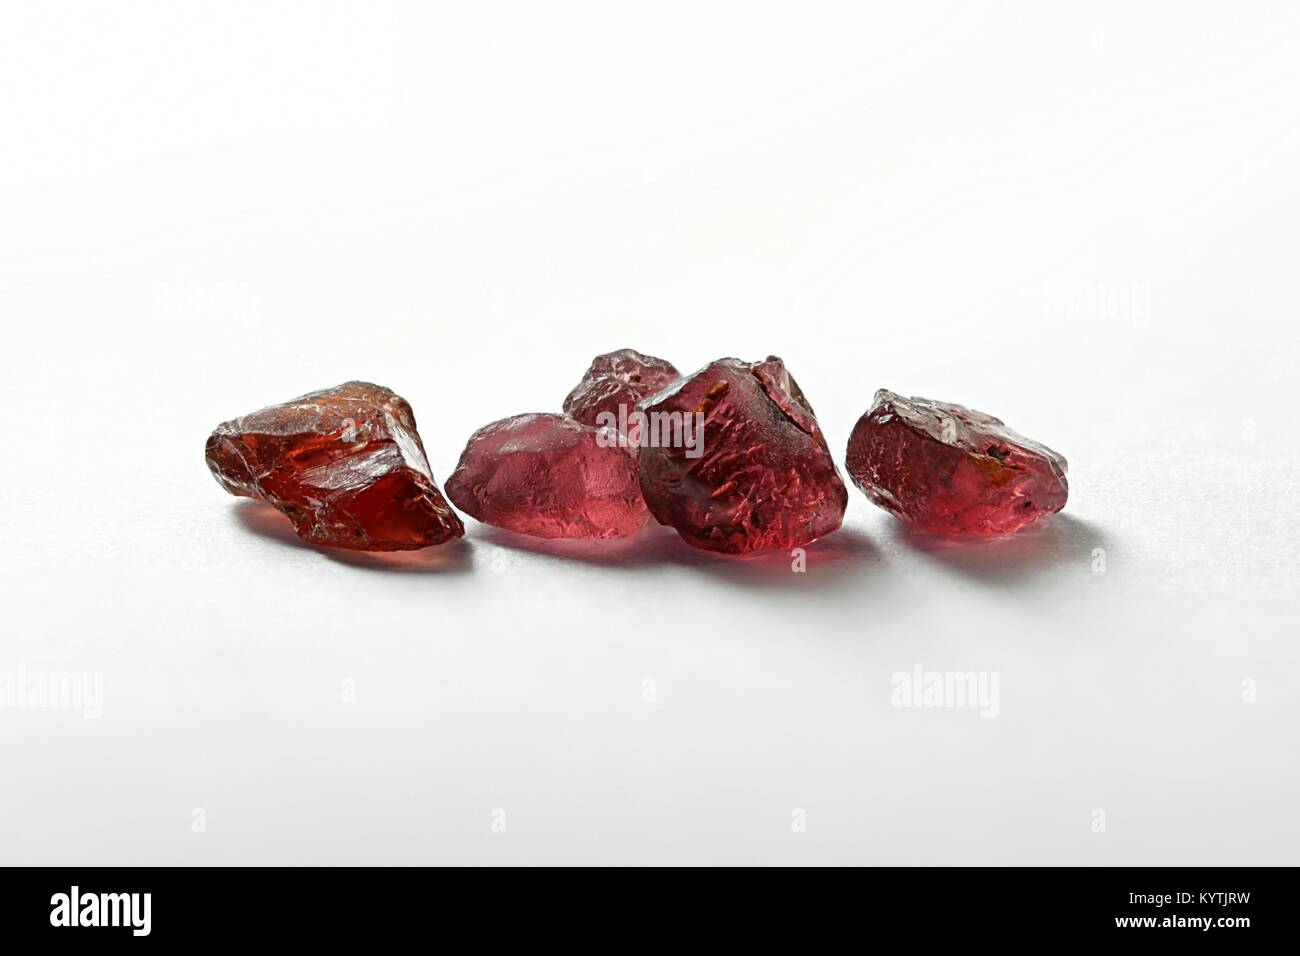 Raw Garnet Crystal by Science Photo Library